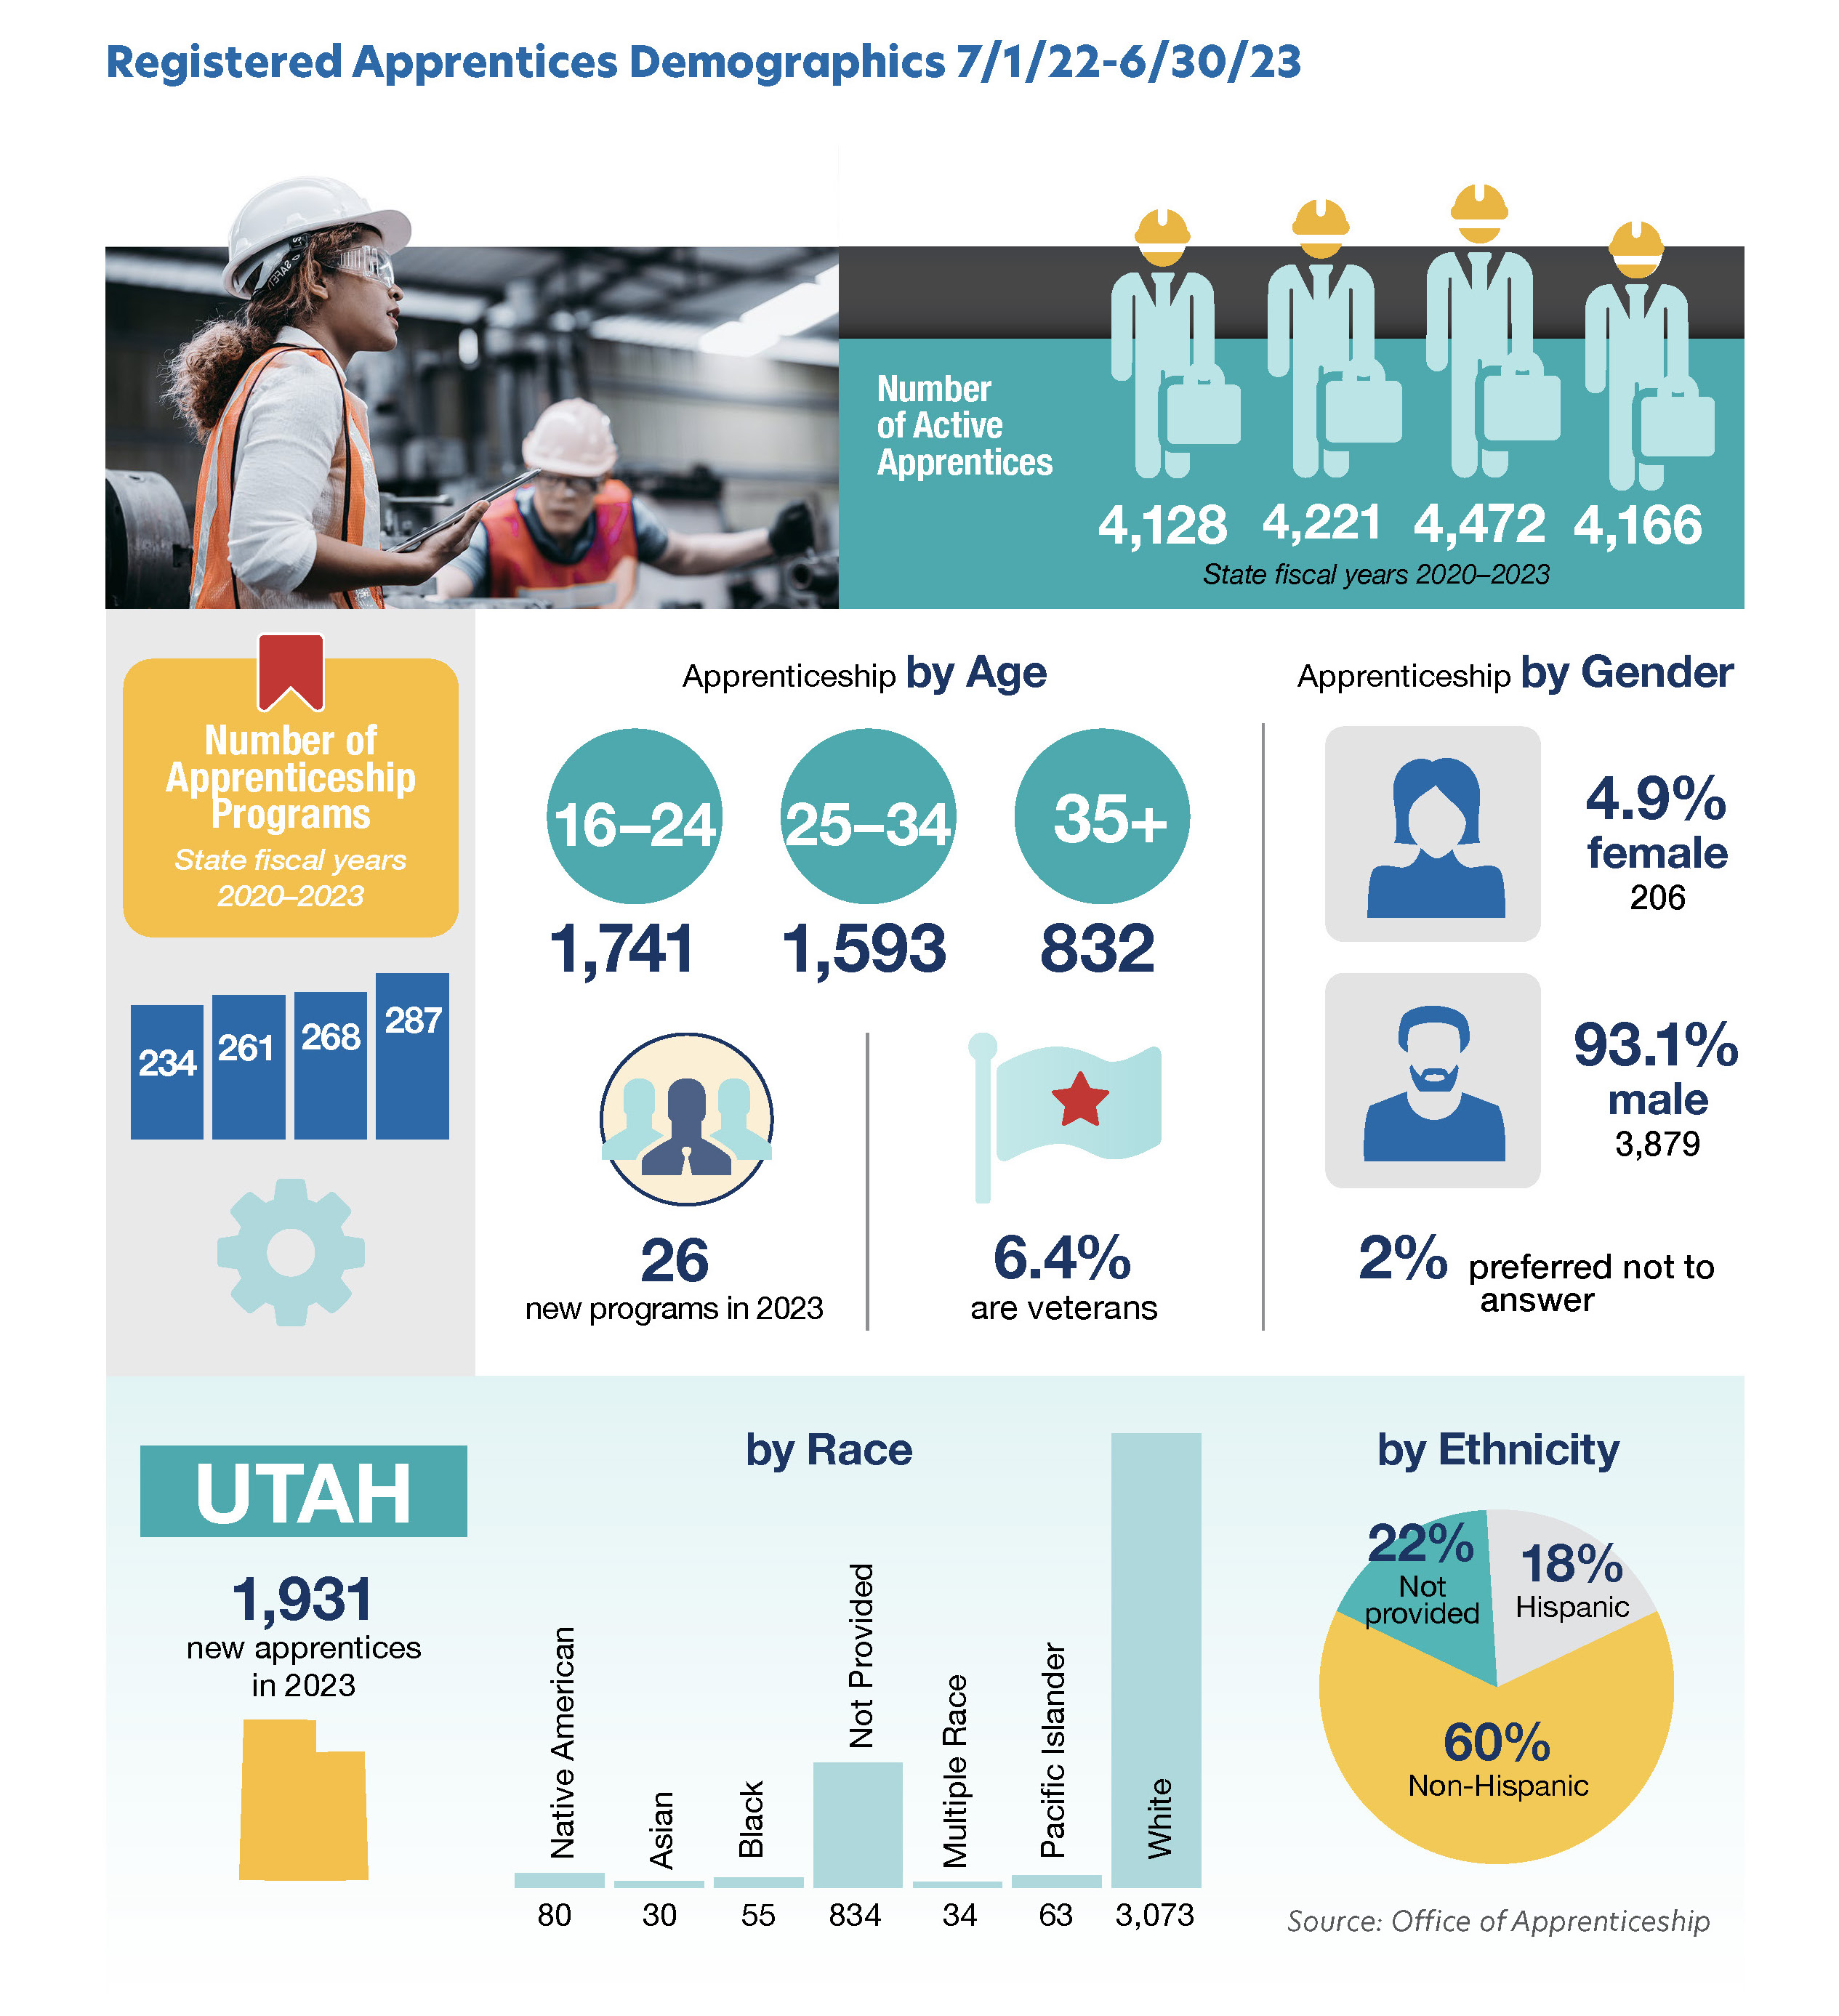 Apprenticeship in Utah statistics:
                                    In Utah, the number of apprenticeship programs for state fiscal years from 2017-2020 are 
                                    182, 196, 198 and 234. The number of active apprentices for state fiscal years from 2017-2020 
                                    are 3,005, 2,970, 3,814 and 4,128. There were 1,678 new apprentices in 2020. There were 21 new 
                                    apprenticeship programs in 2020. In 2020, there were 1,223 apprentices ages 35 and older, 1,849 
                                    apprentices ages 25-34 and 1,055 apprentices ages 16-24. Of all apprentices in 2020, 3.5% were 
                                    female and 96.5% were male while 9% were veterans.